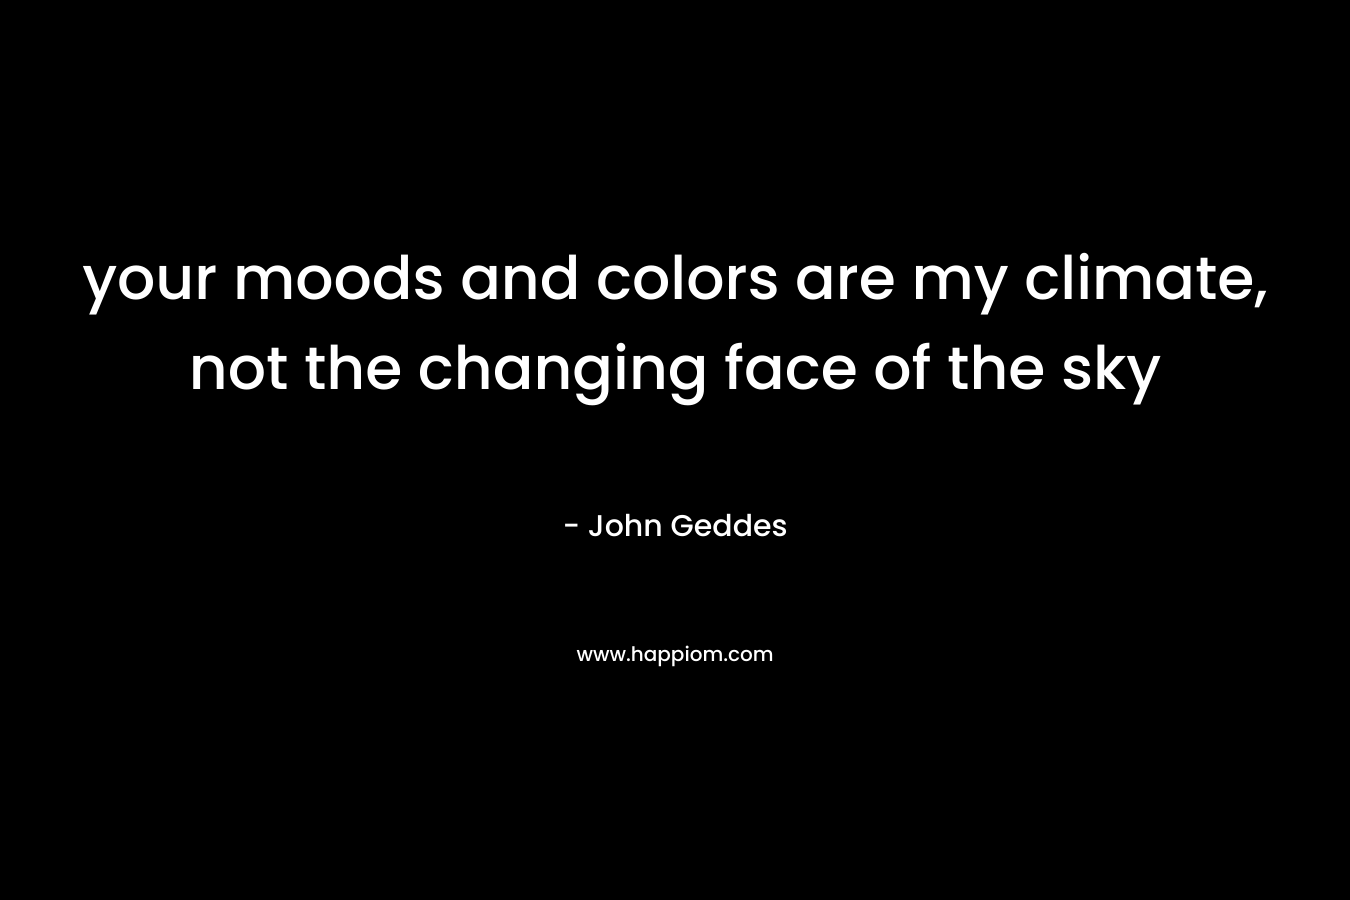 your moods and colors are my climate, not the changing face of the sky